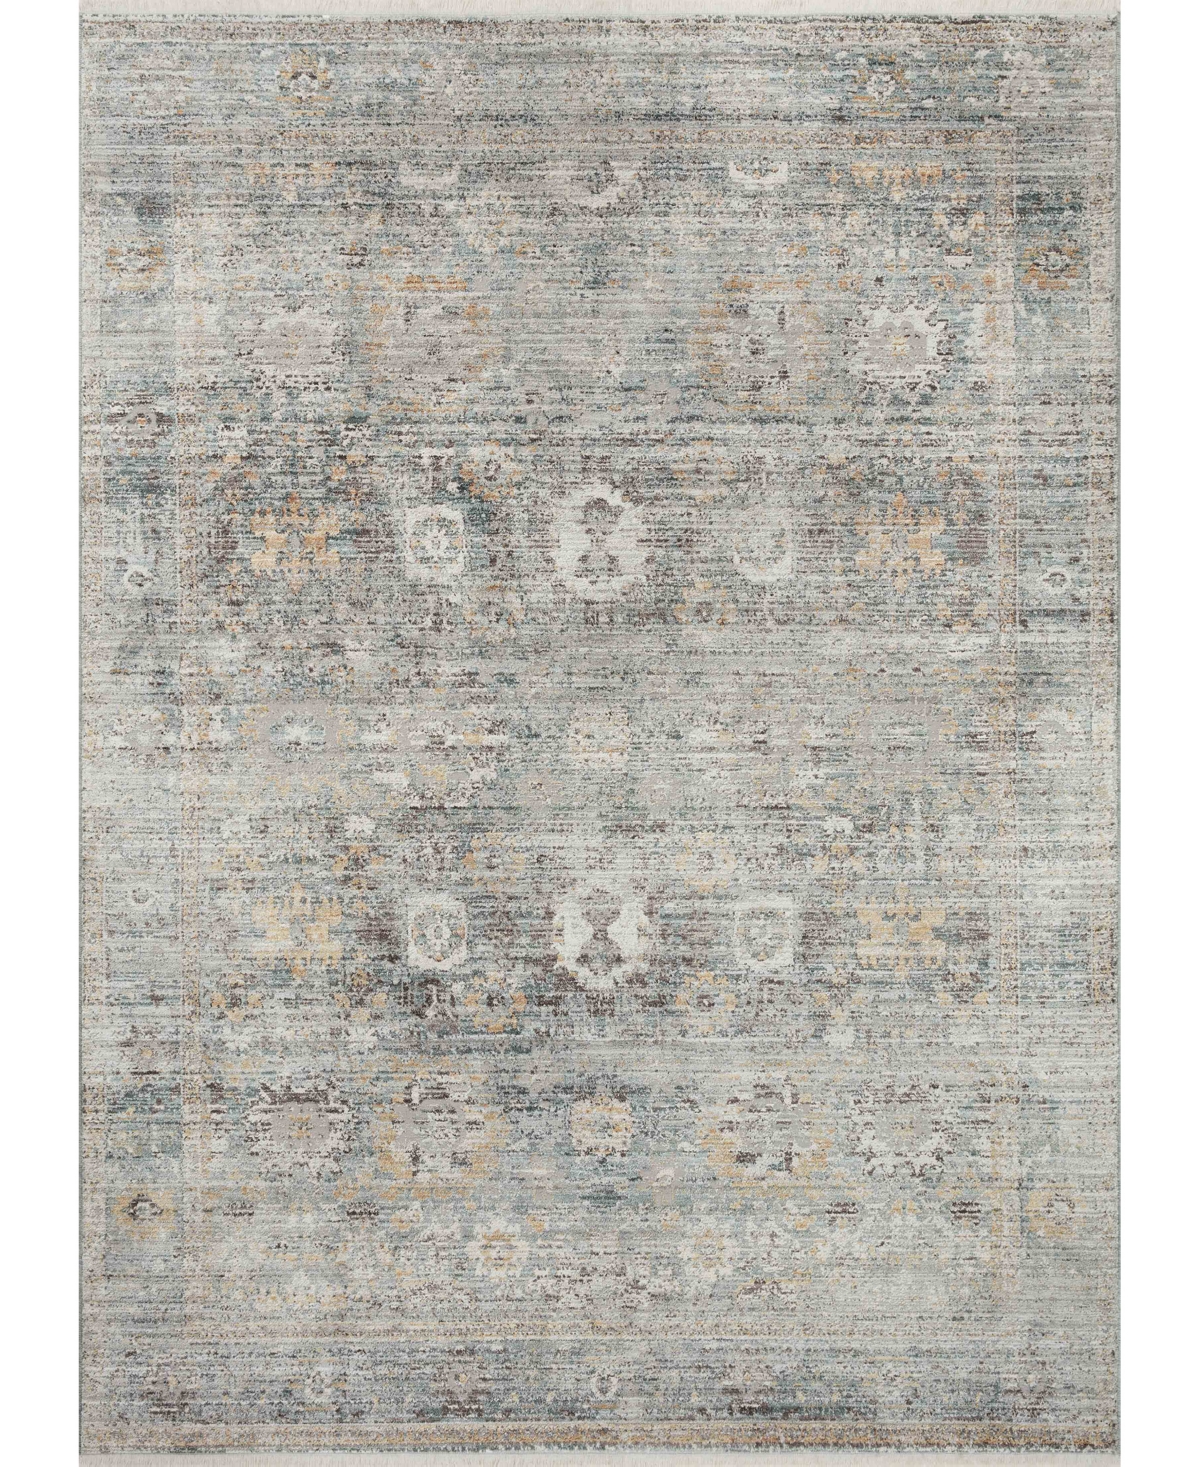 Loloi Bonney Bny-06 6'7in x 9'7in Area Rug - Teal, Gold